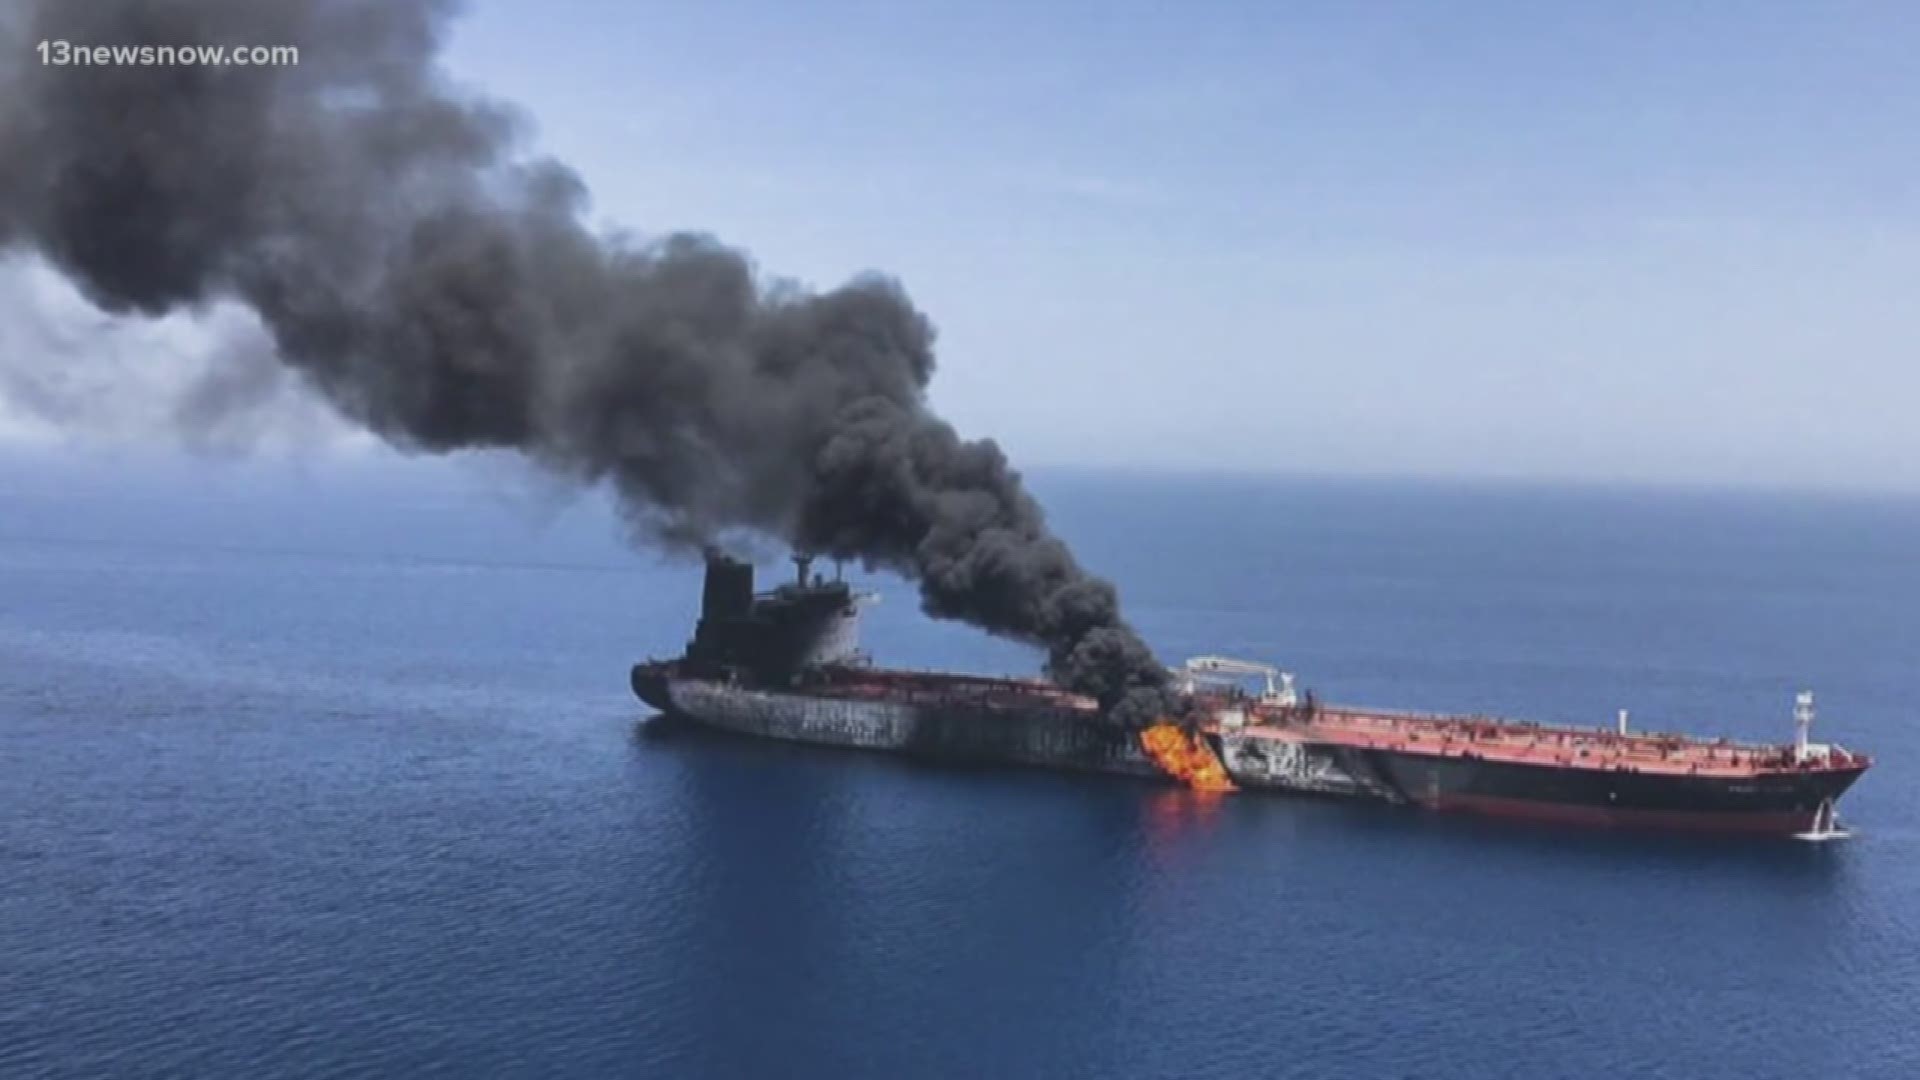 The USS Bainbridge is in the Gulf of Oman offering help to the crew of a Japanese oil tanker. According to Secretary of State Mike Pompeo, Iran was behind the attack, but Iran's Foreign Minister said the U.S. made the allegation without any evidence.